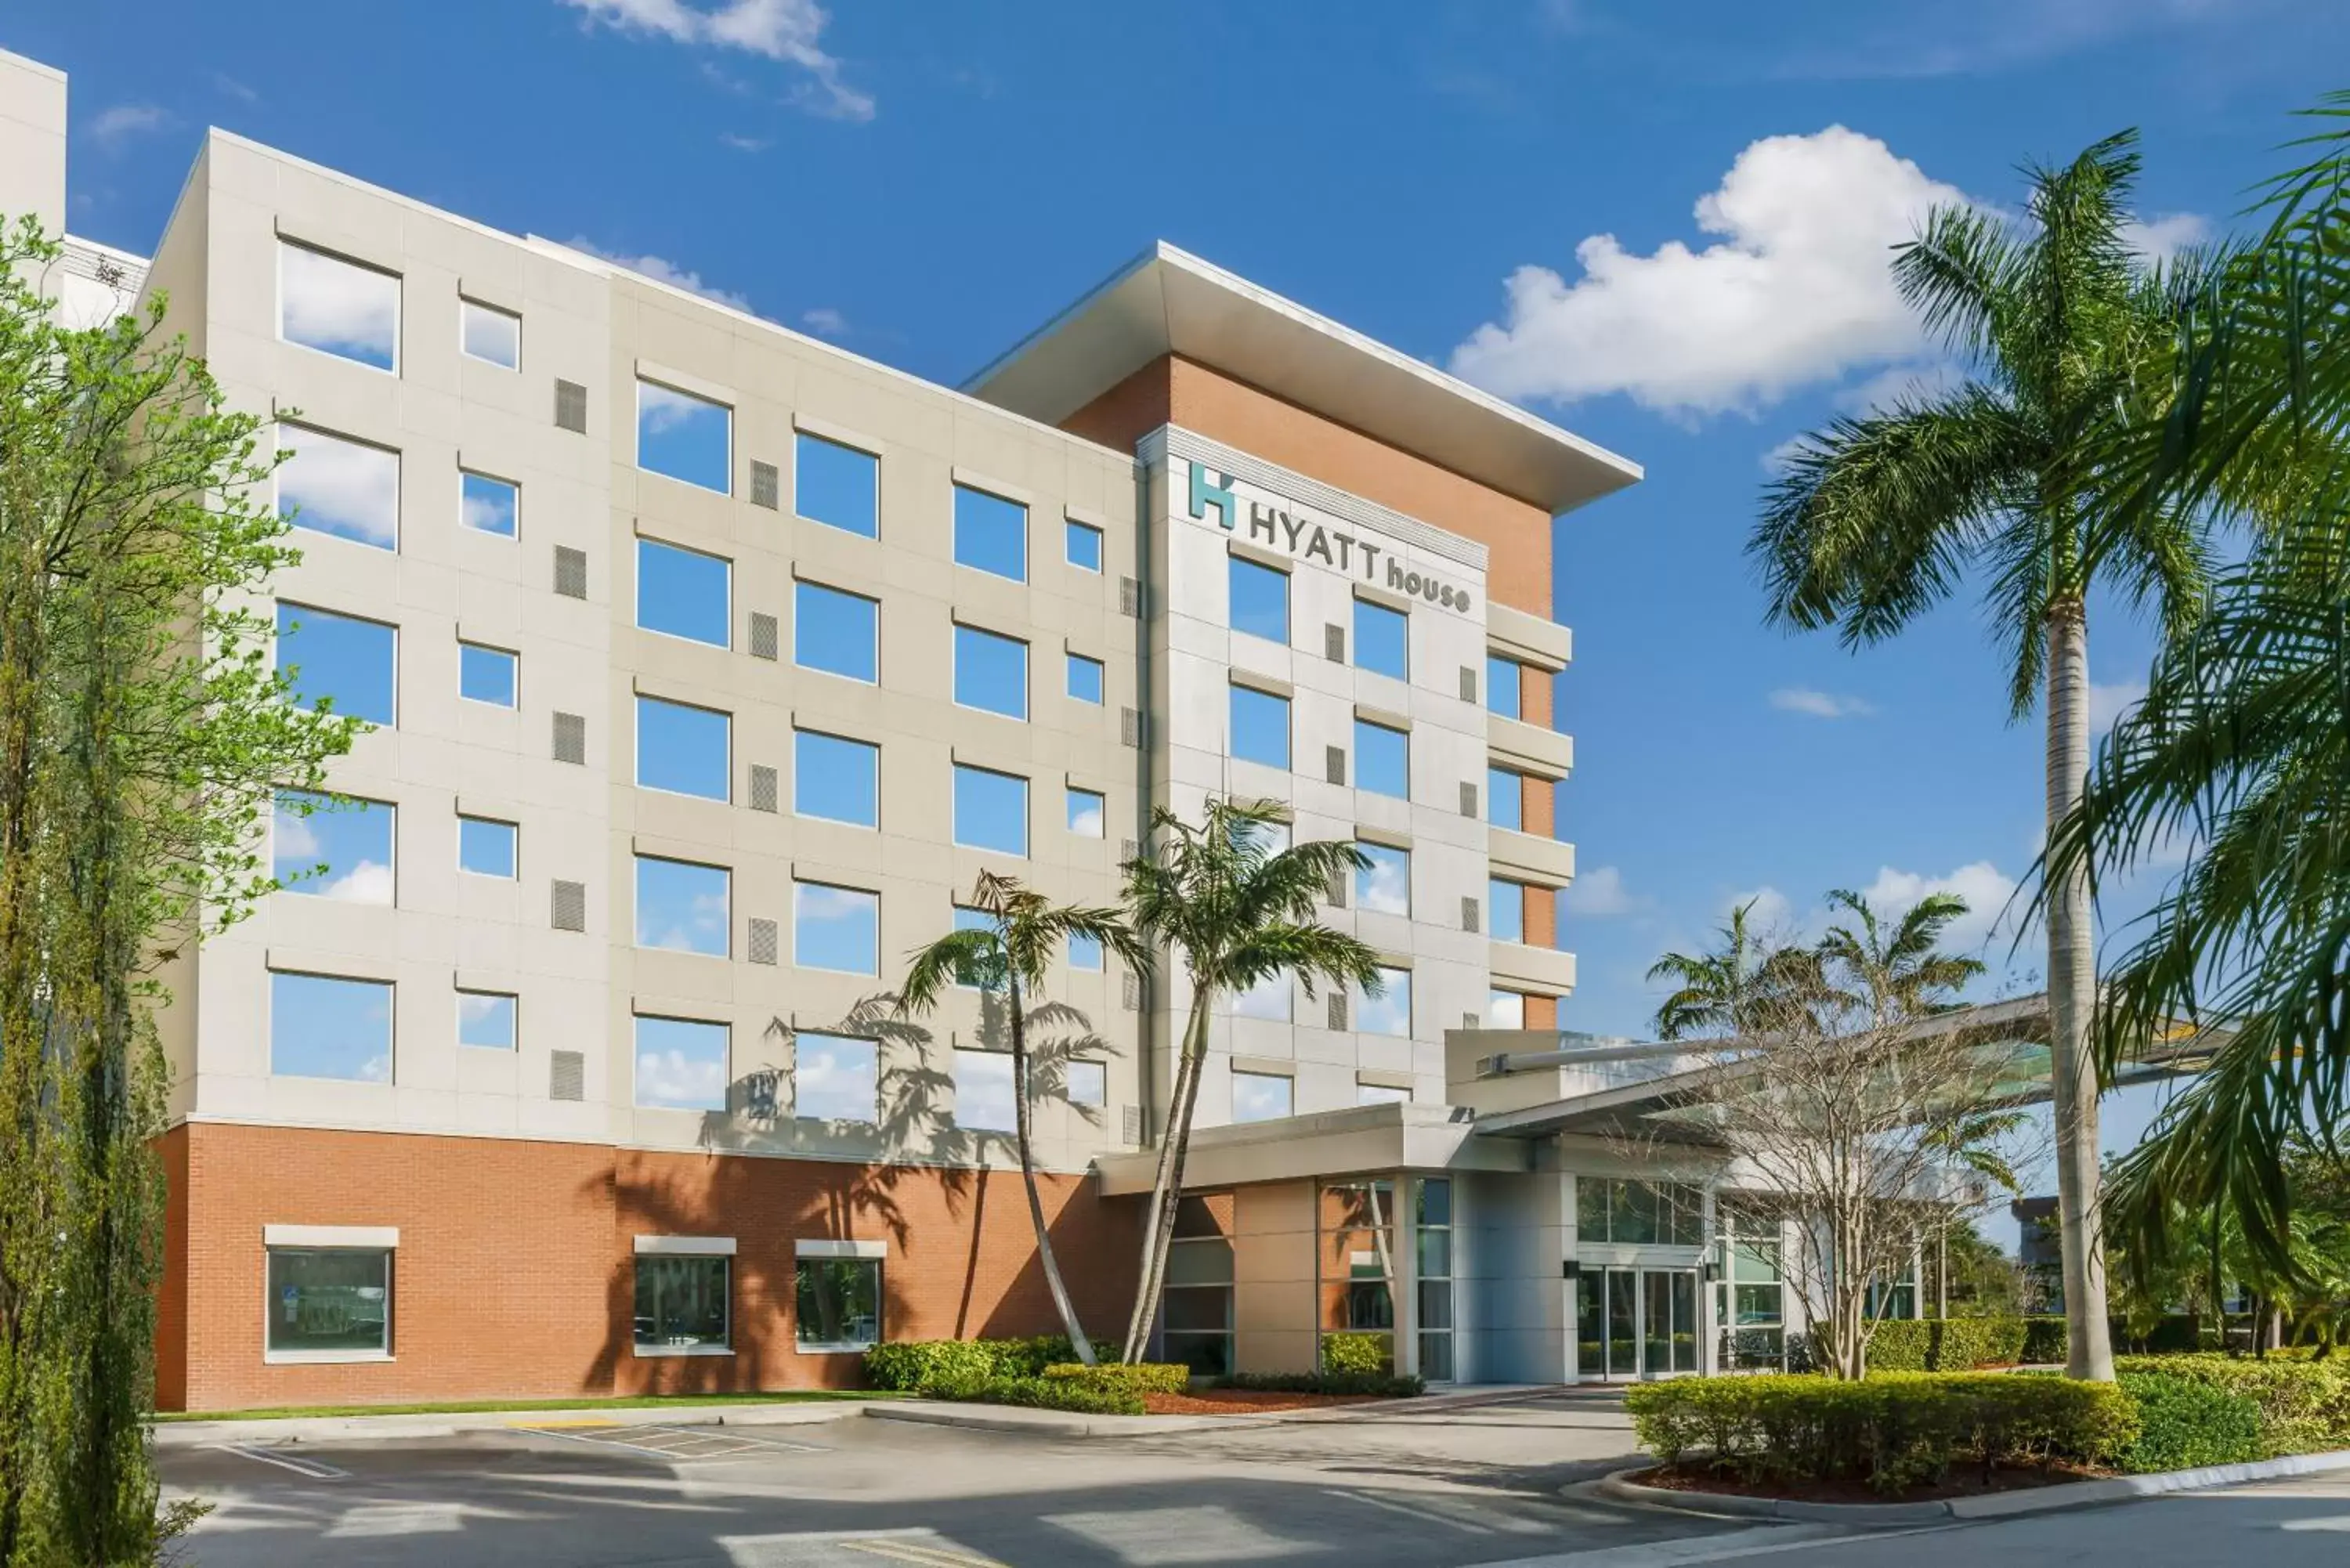 Property Building in Hyatt House Fort Lauderdale Airport/Cruise Port